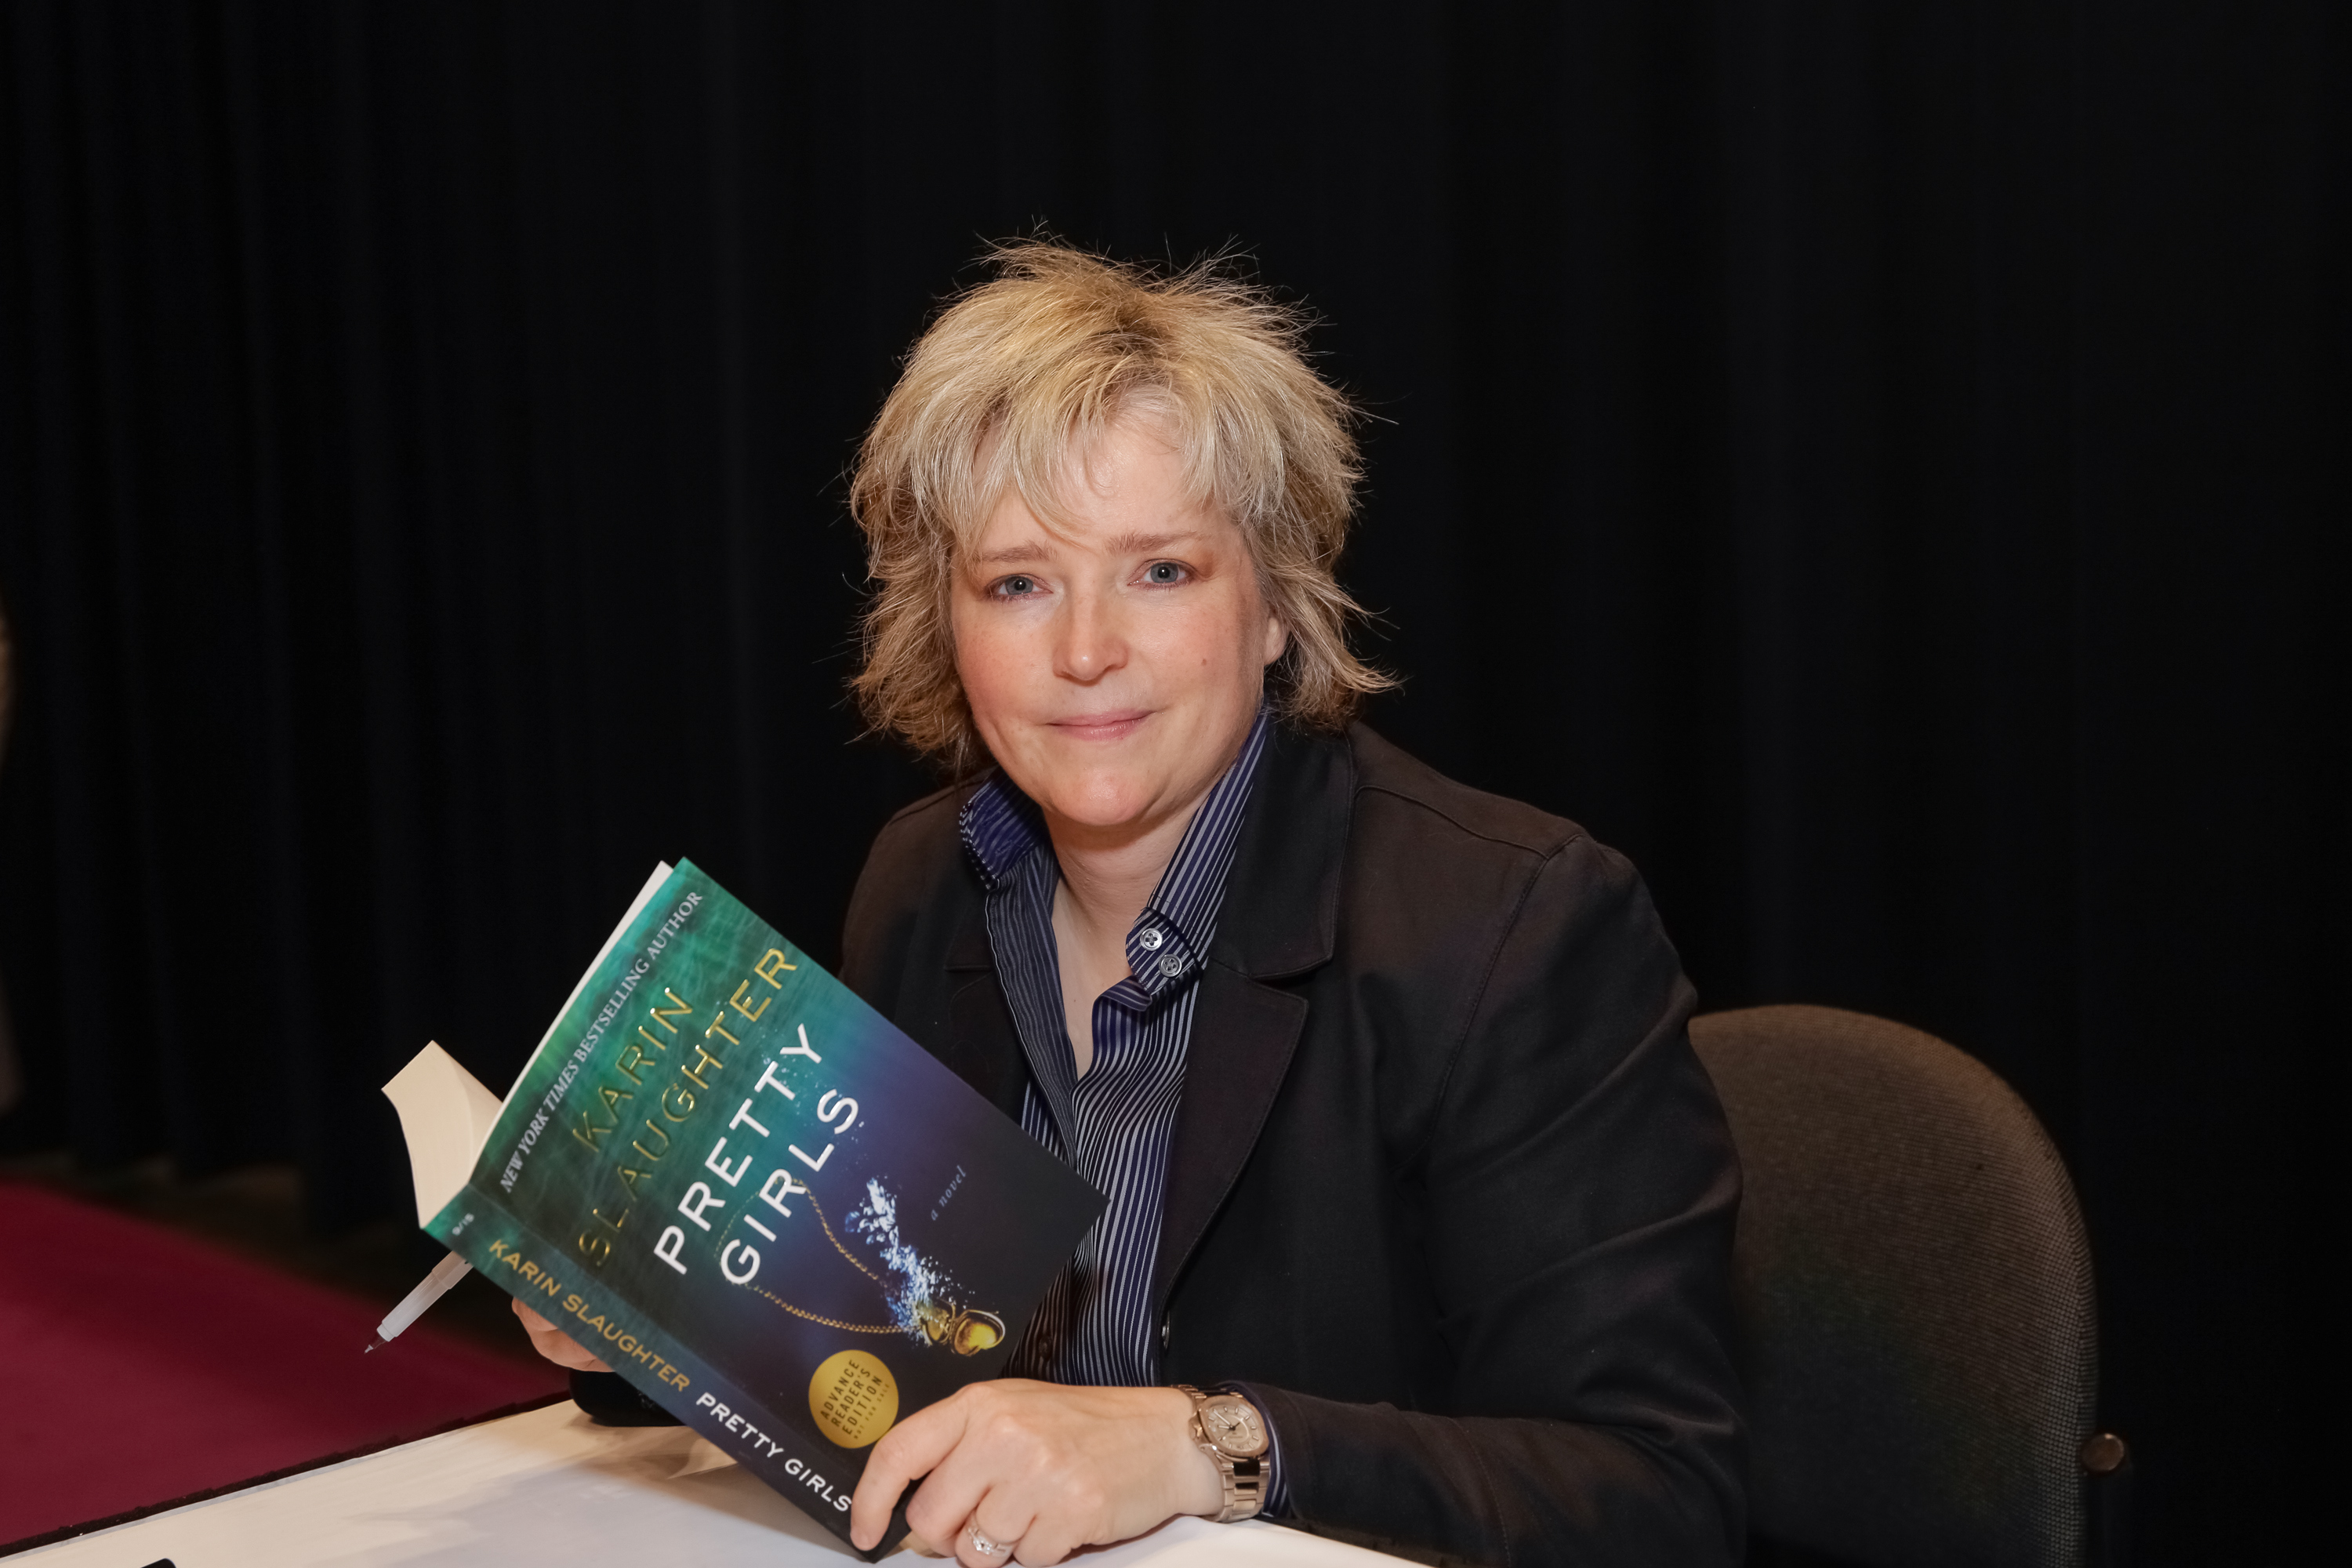 Author Karin Slaughter poses for photographs with her newest book during BookExpo America  in New York City on May 27, 2015. (Brent N. Clarke)